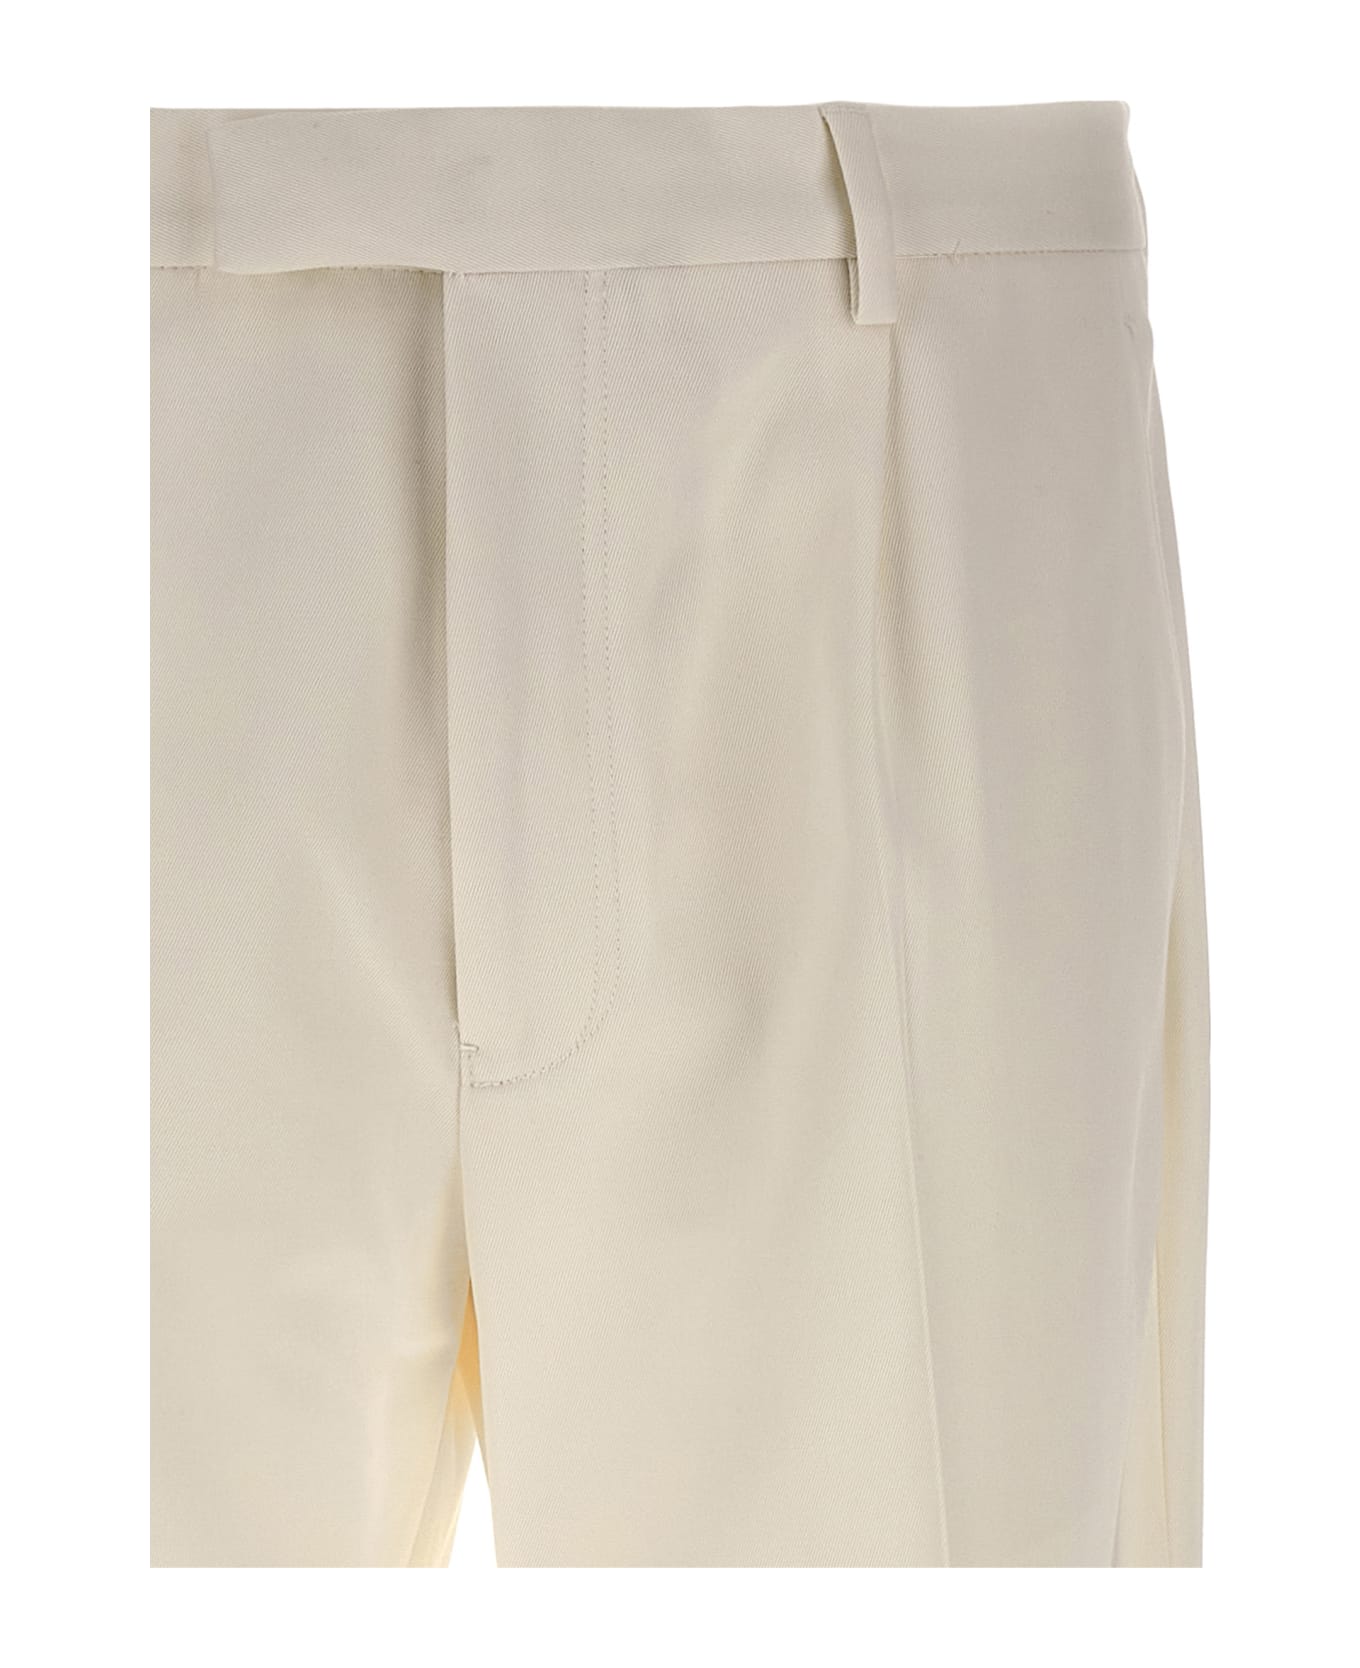 Zegna Front Pleat Pants - White ボトムス